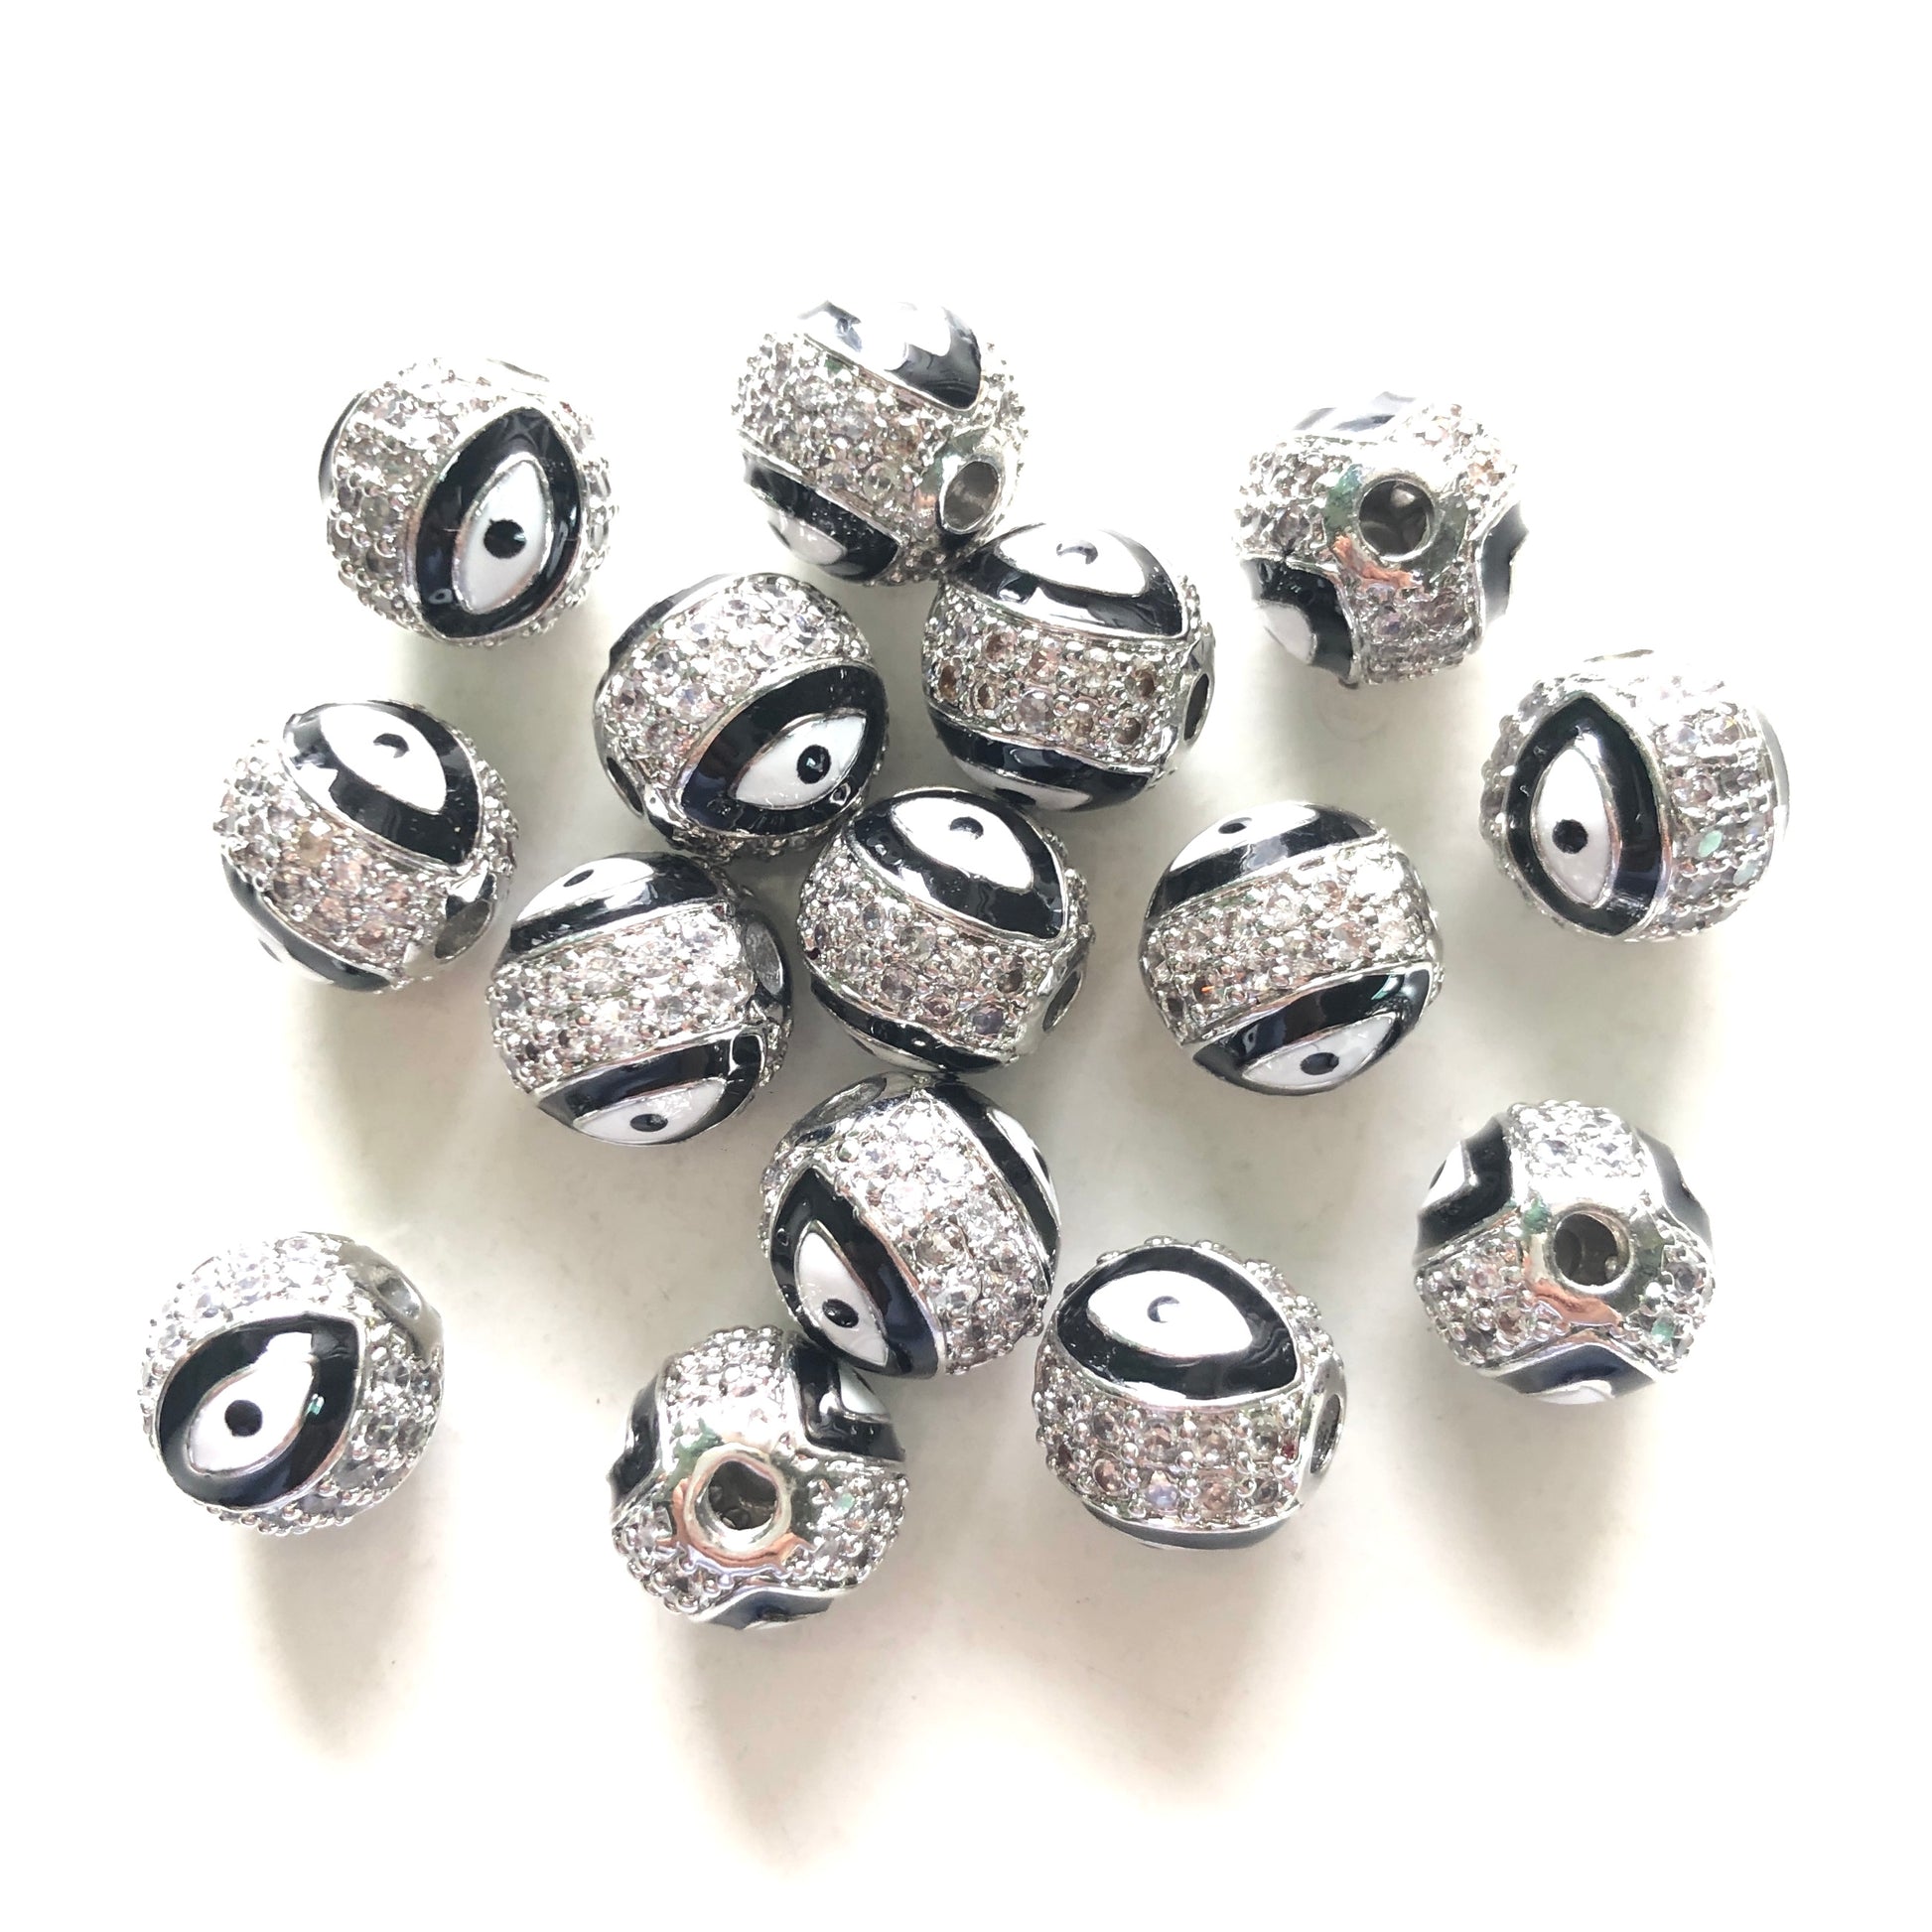 10pcs/lot 10mm CZ Paved Silver Evil Eye Spacers Black CZ Paved Spacers 10mm Beads Ball Beads New Spacers Arrivals Charms Beads Beyond